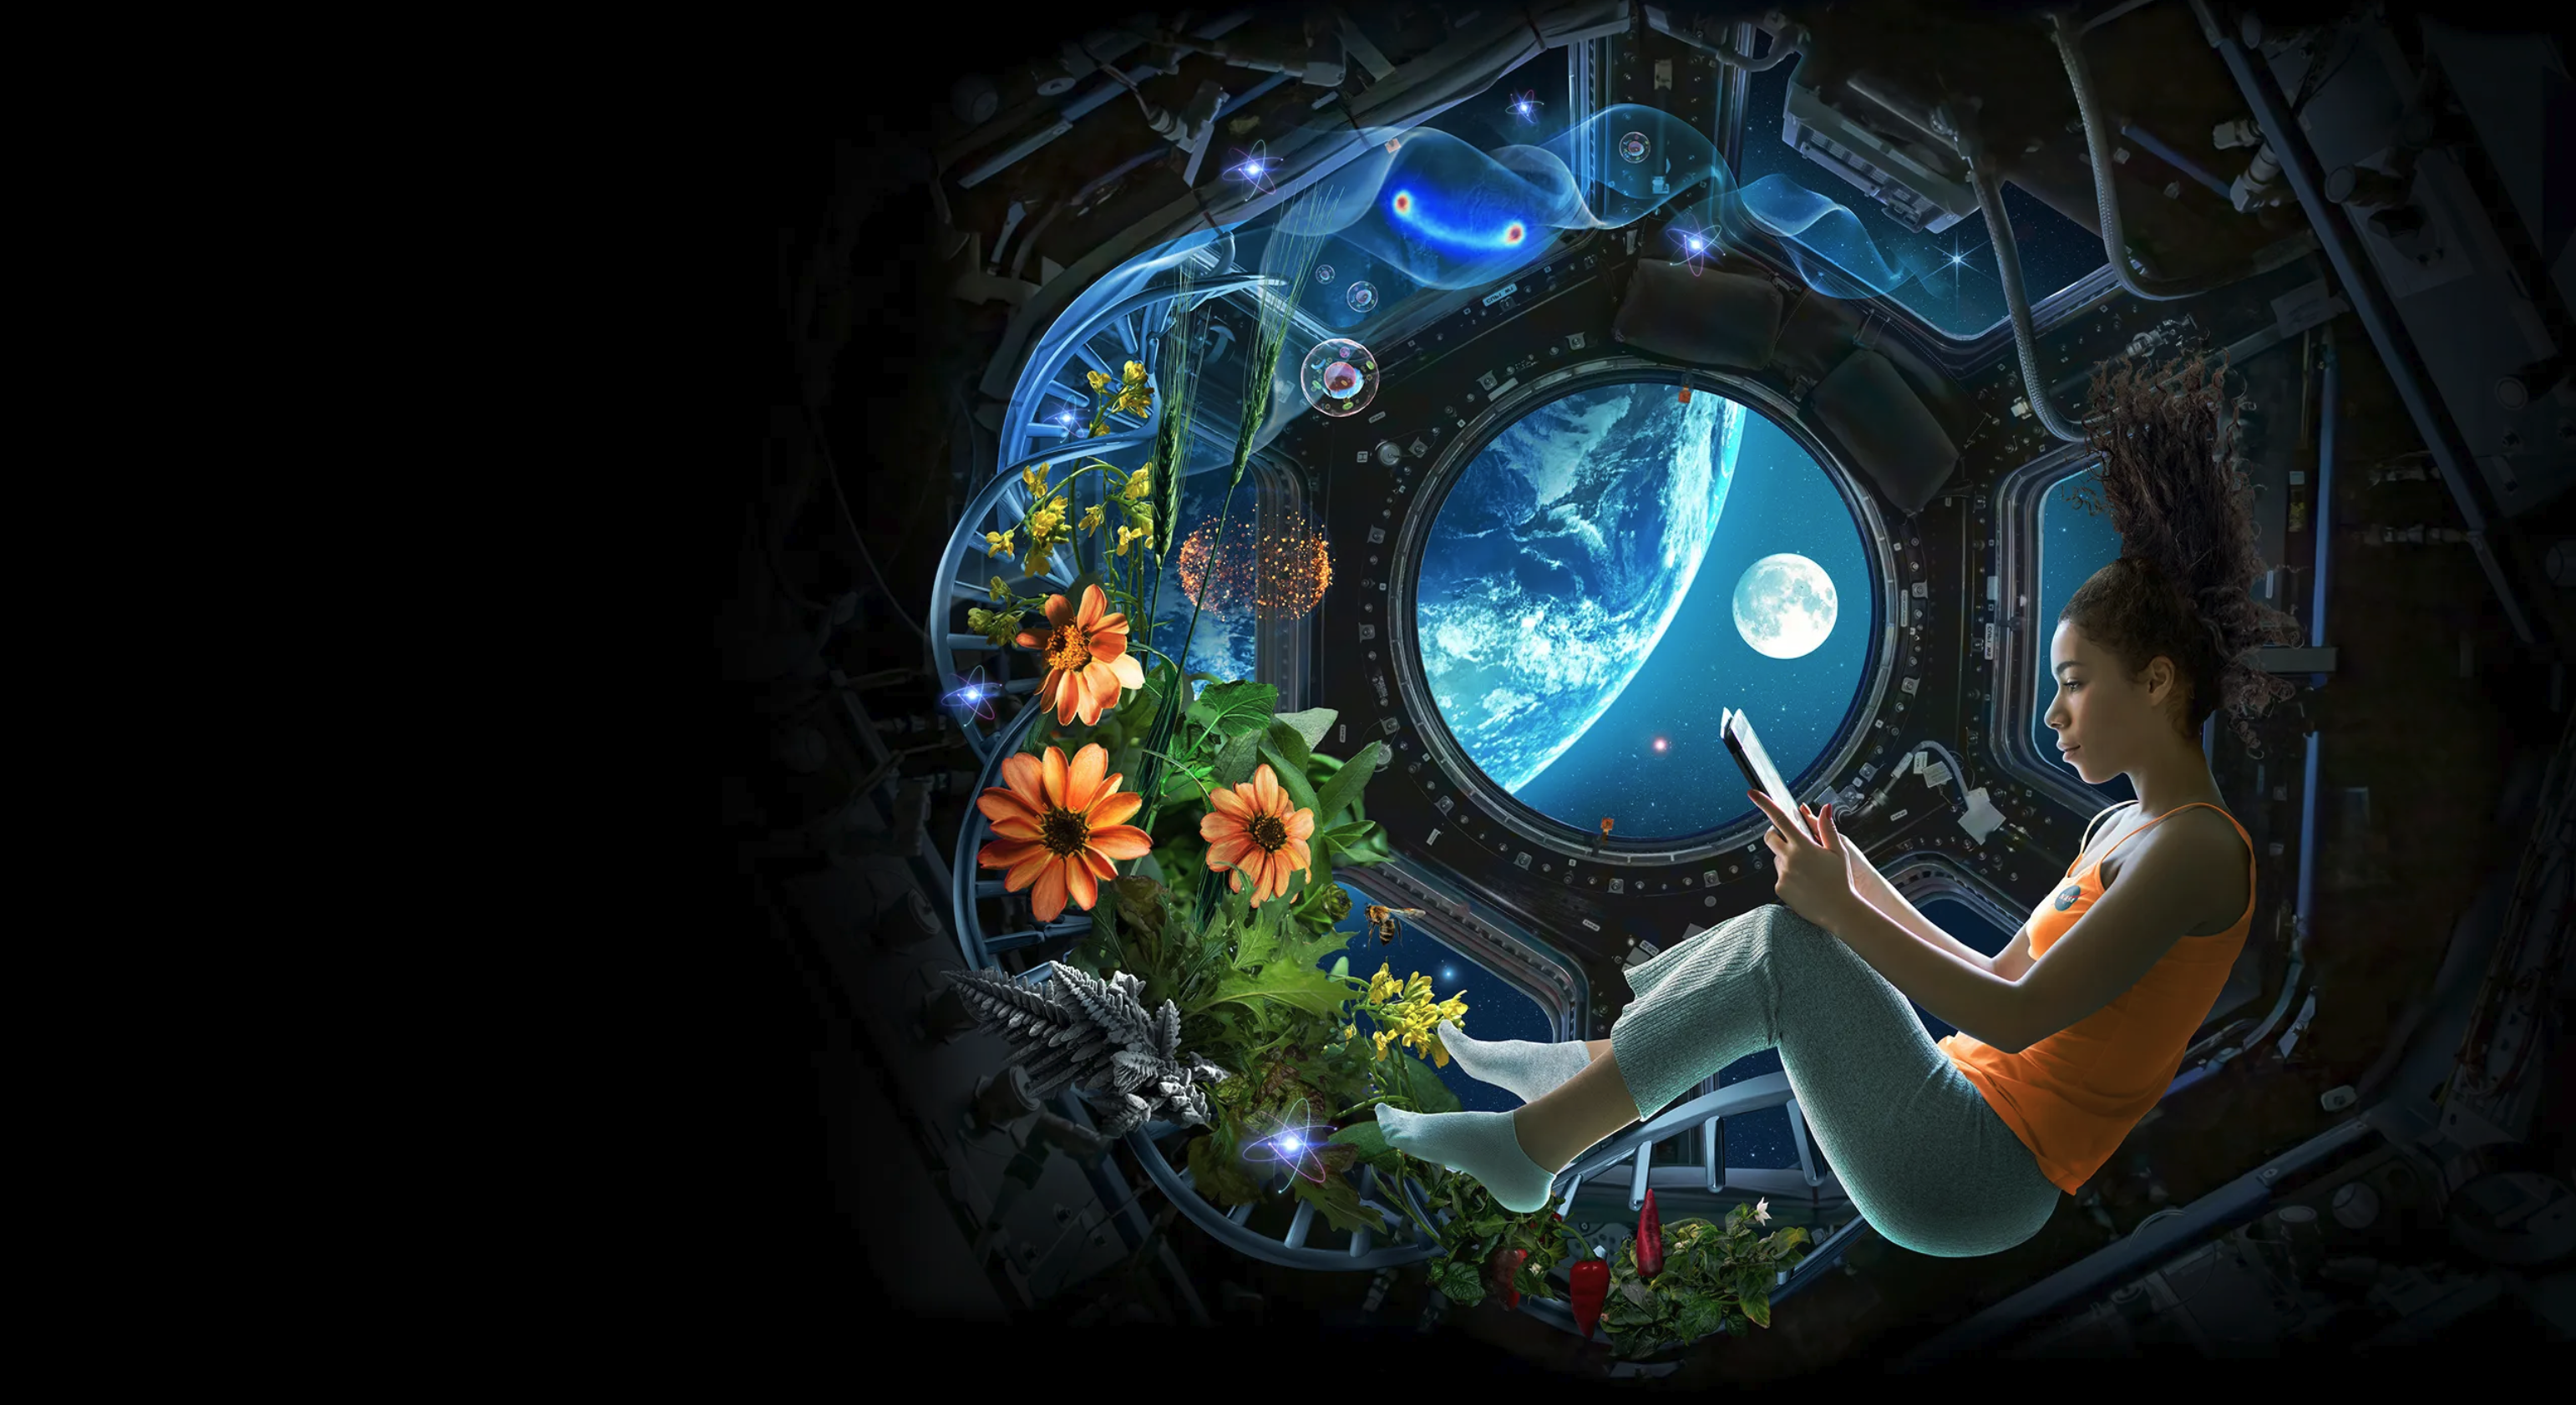 A serene and surreal scene where a person is floating in a lotus position inside a space station with a large viewing window showing Earth. The person appears focused on a tablet device, surrounded by a vibrant mix of nature and technology. Flowers, green foliage, and a bird suggest a harmonious blend of an ecosystem within the space station. The Earth looms large in the background, suggesting the station is in orbit.